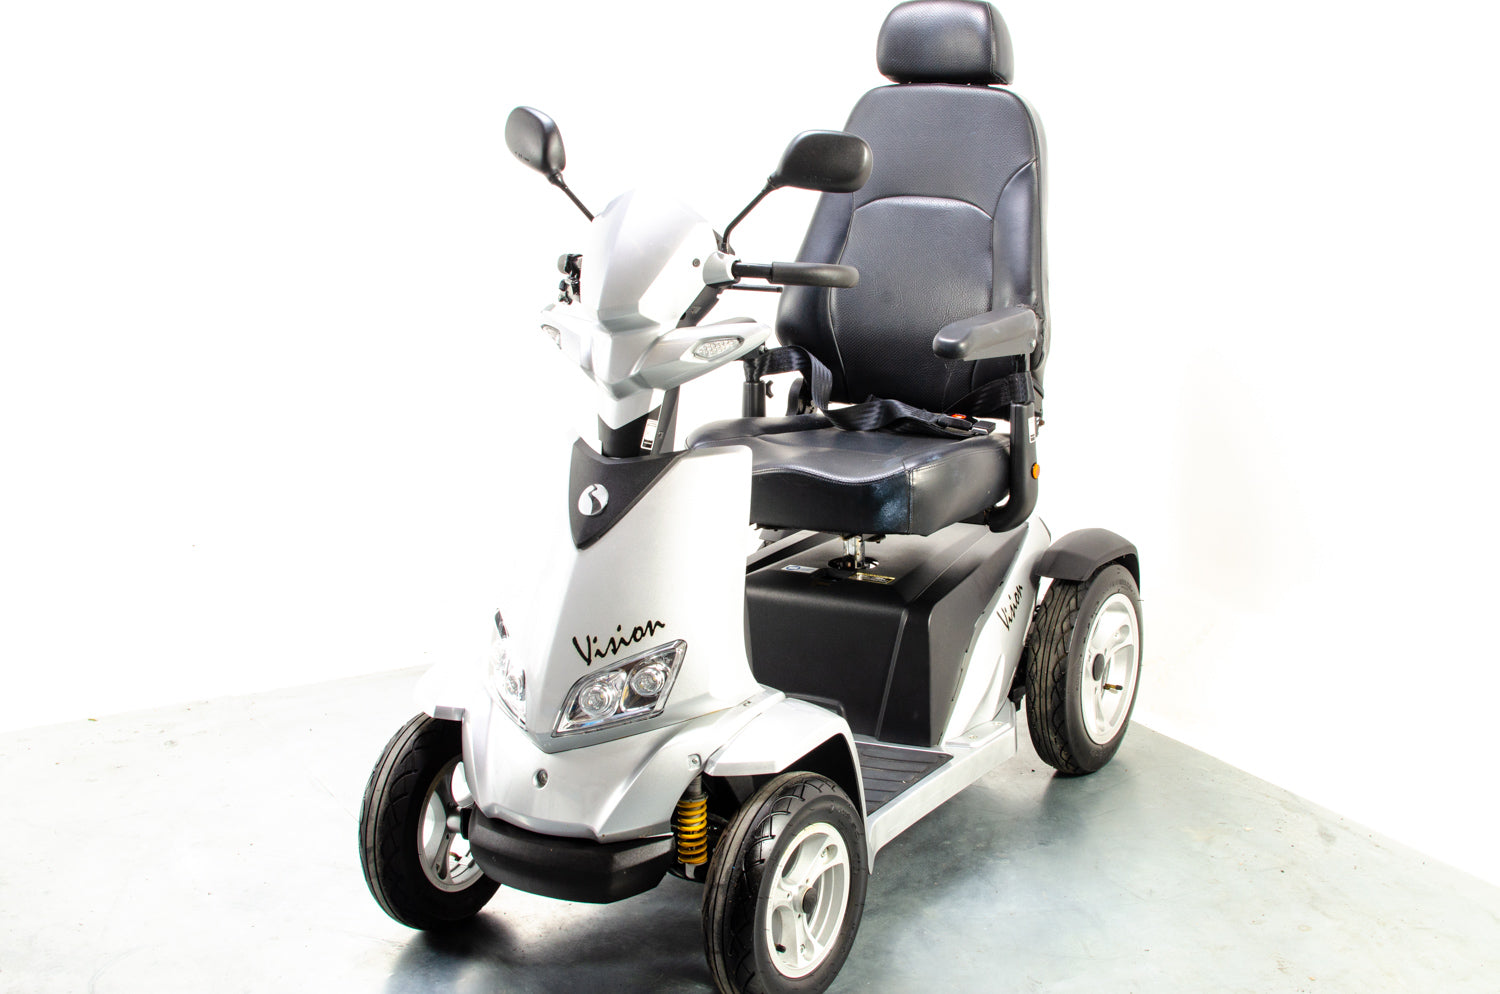 Rascal Vision Used Electric Mobility Scooter 8mph Large All-Terrain Road Legal Silver